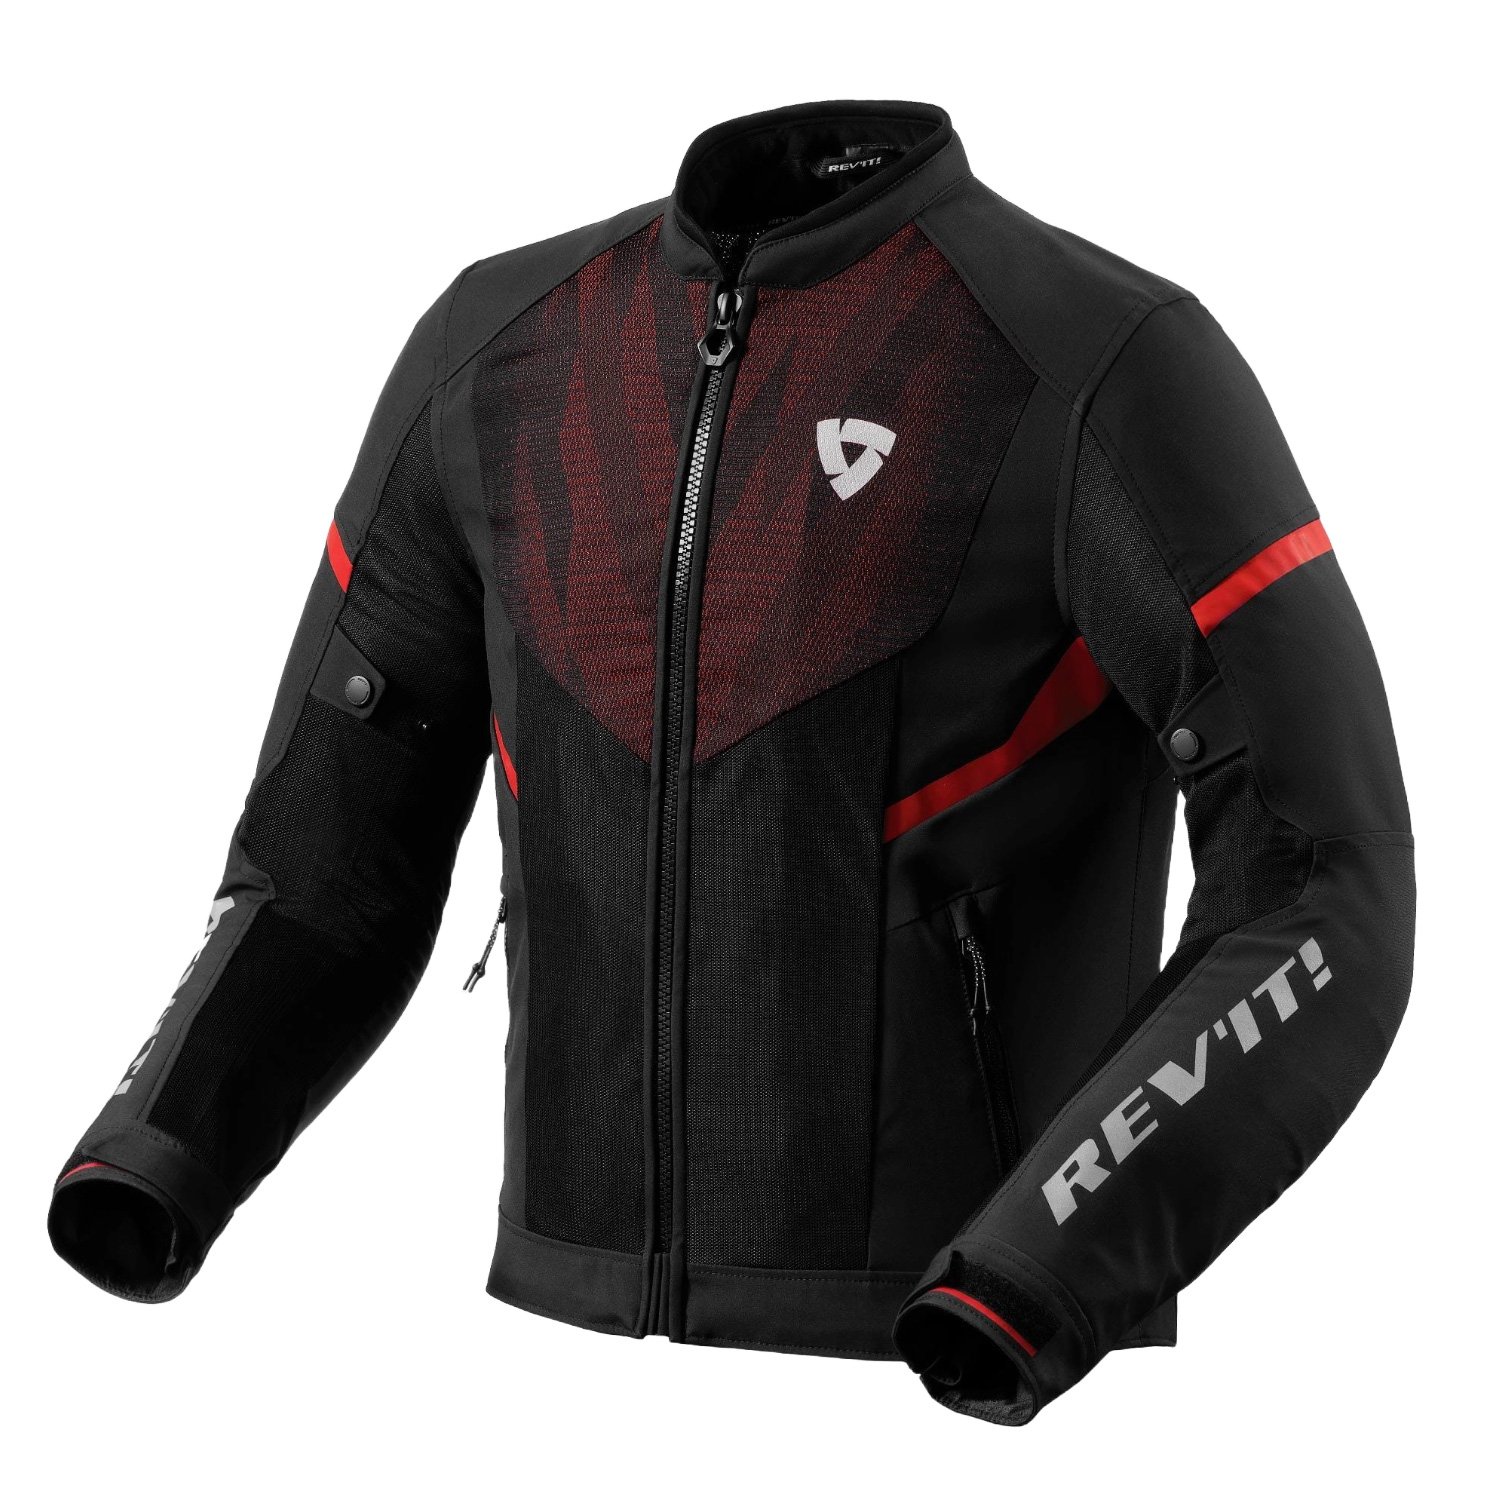 Image of REV'IT! Hyperspeed 2 GT Air Jacket Black Neon Red Talla XL